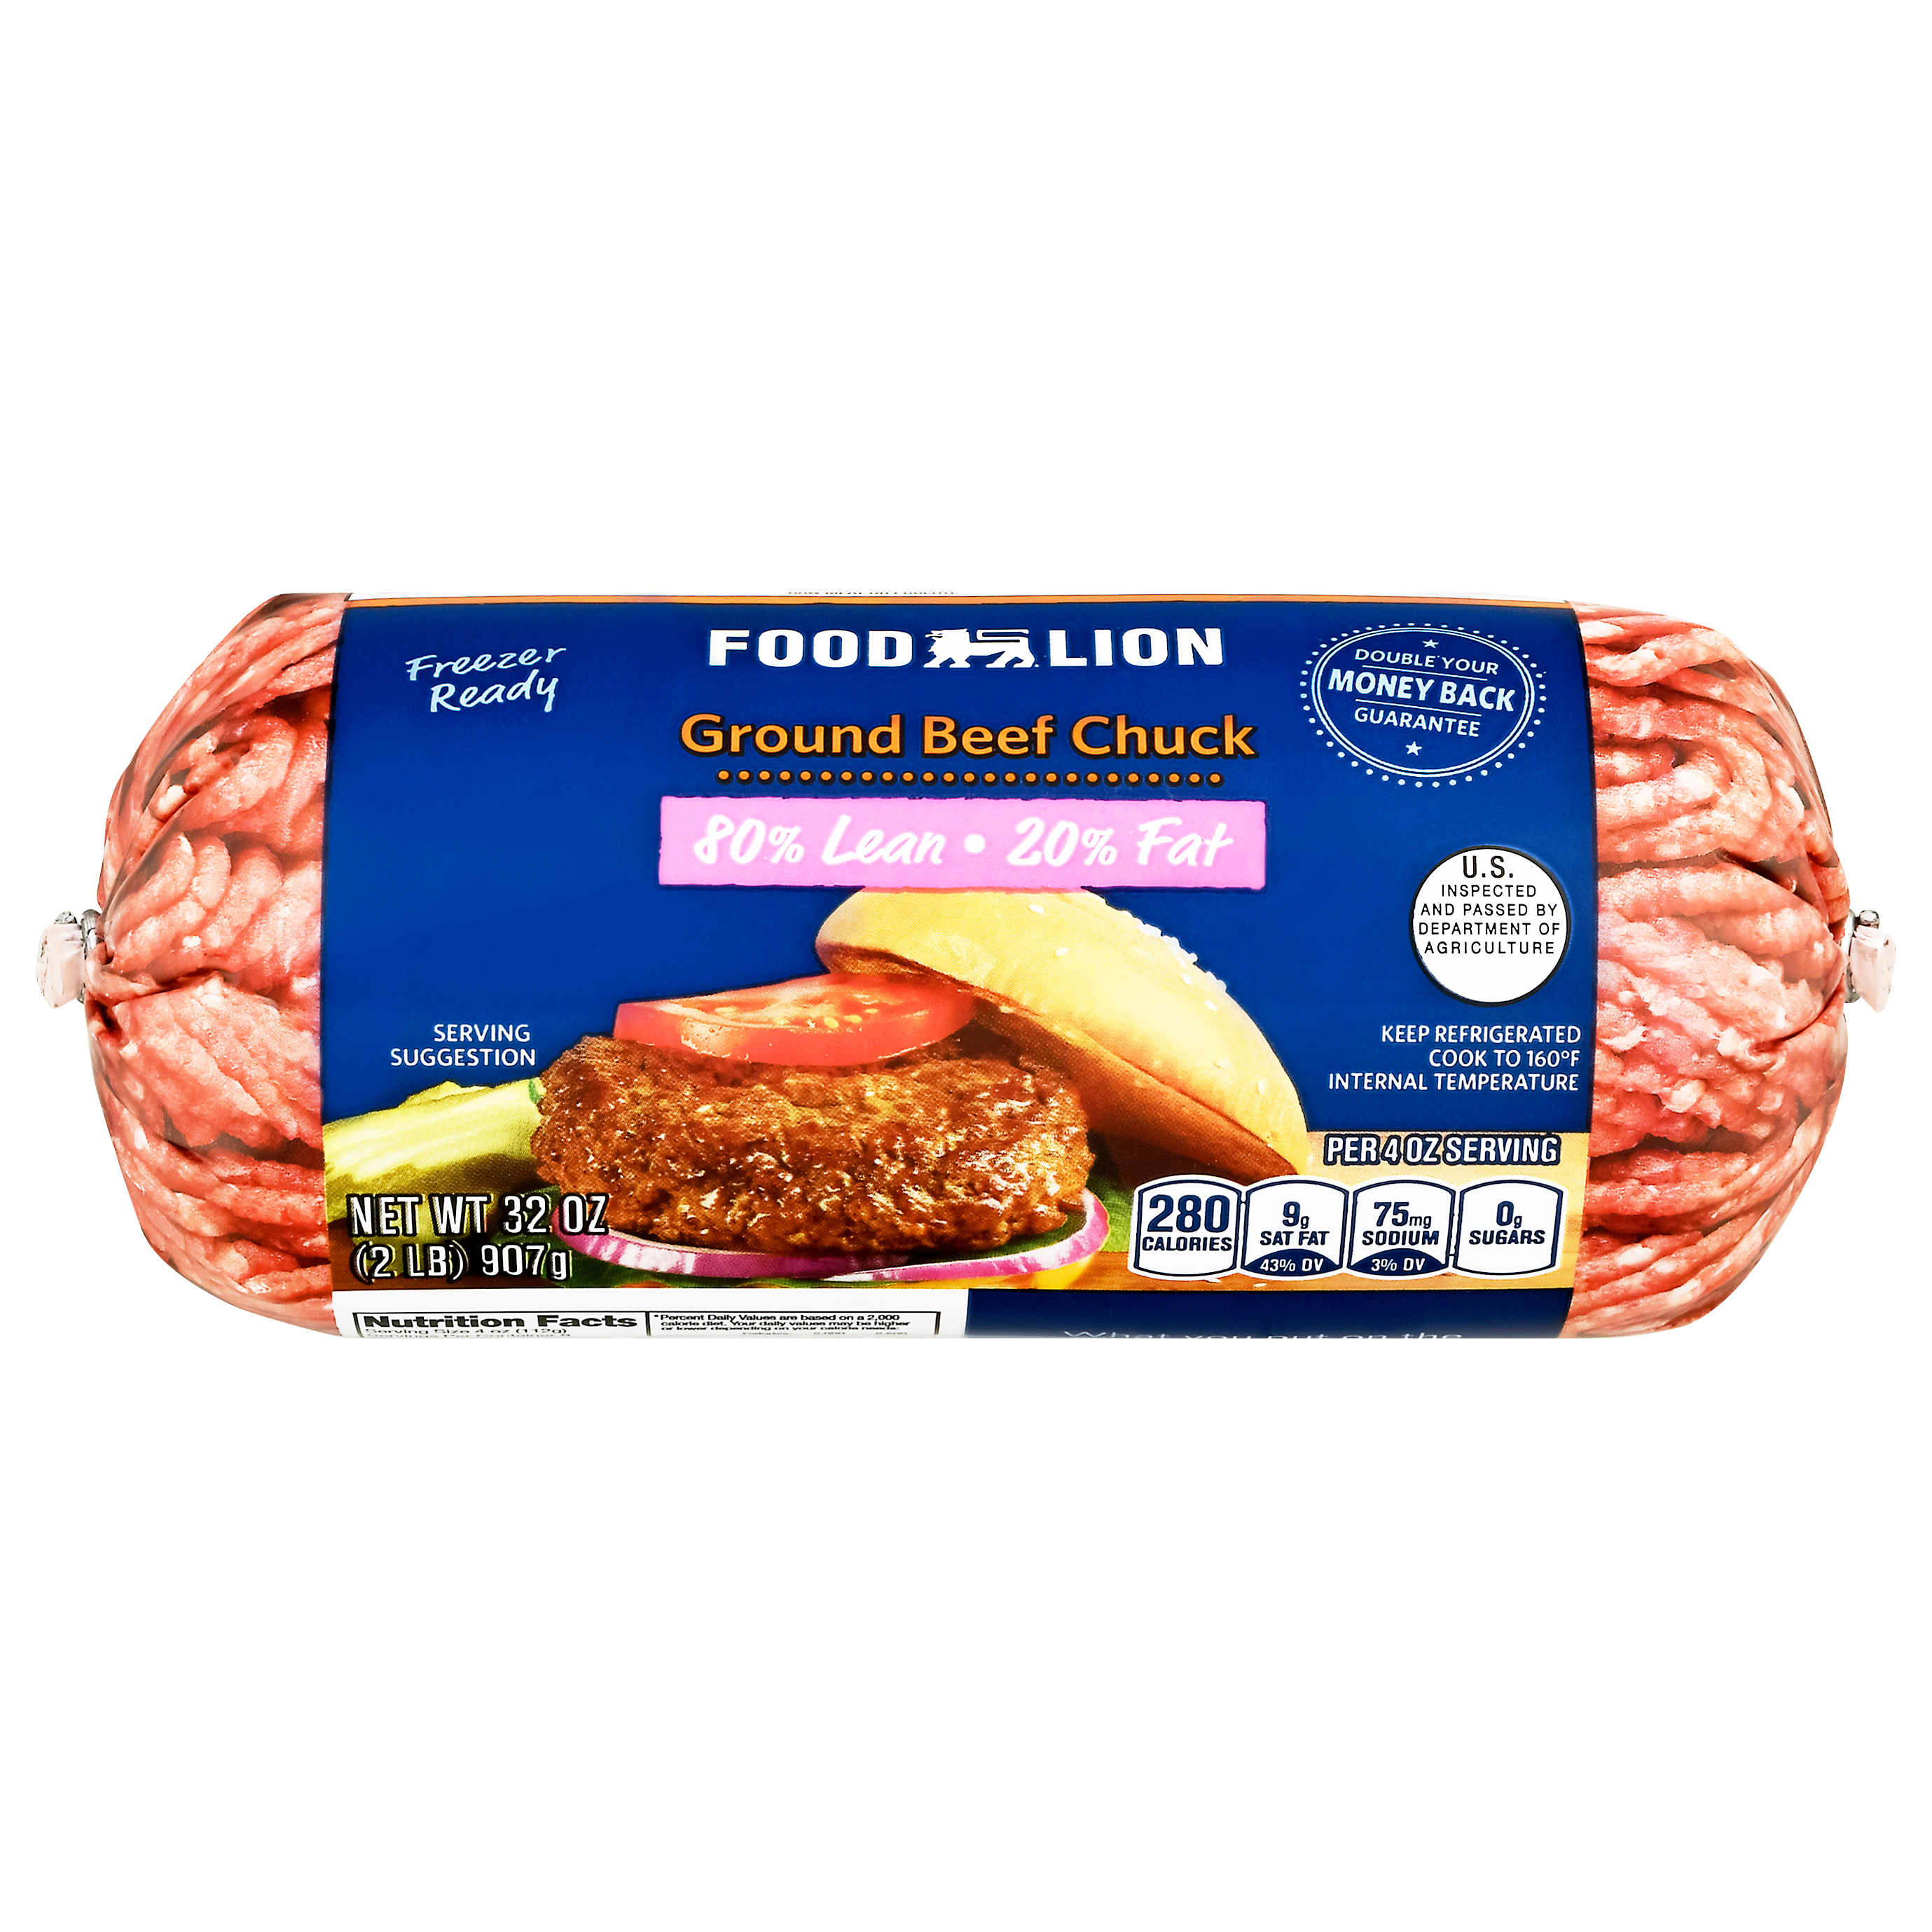 Calories in 1 lb of Ground Beef (80% Lean / 20% Fat) and Nutrition Facts